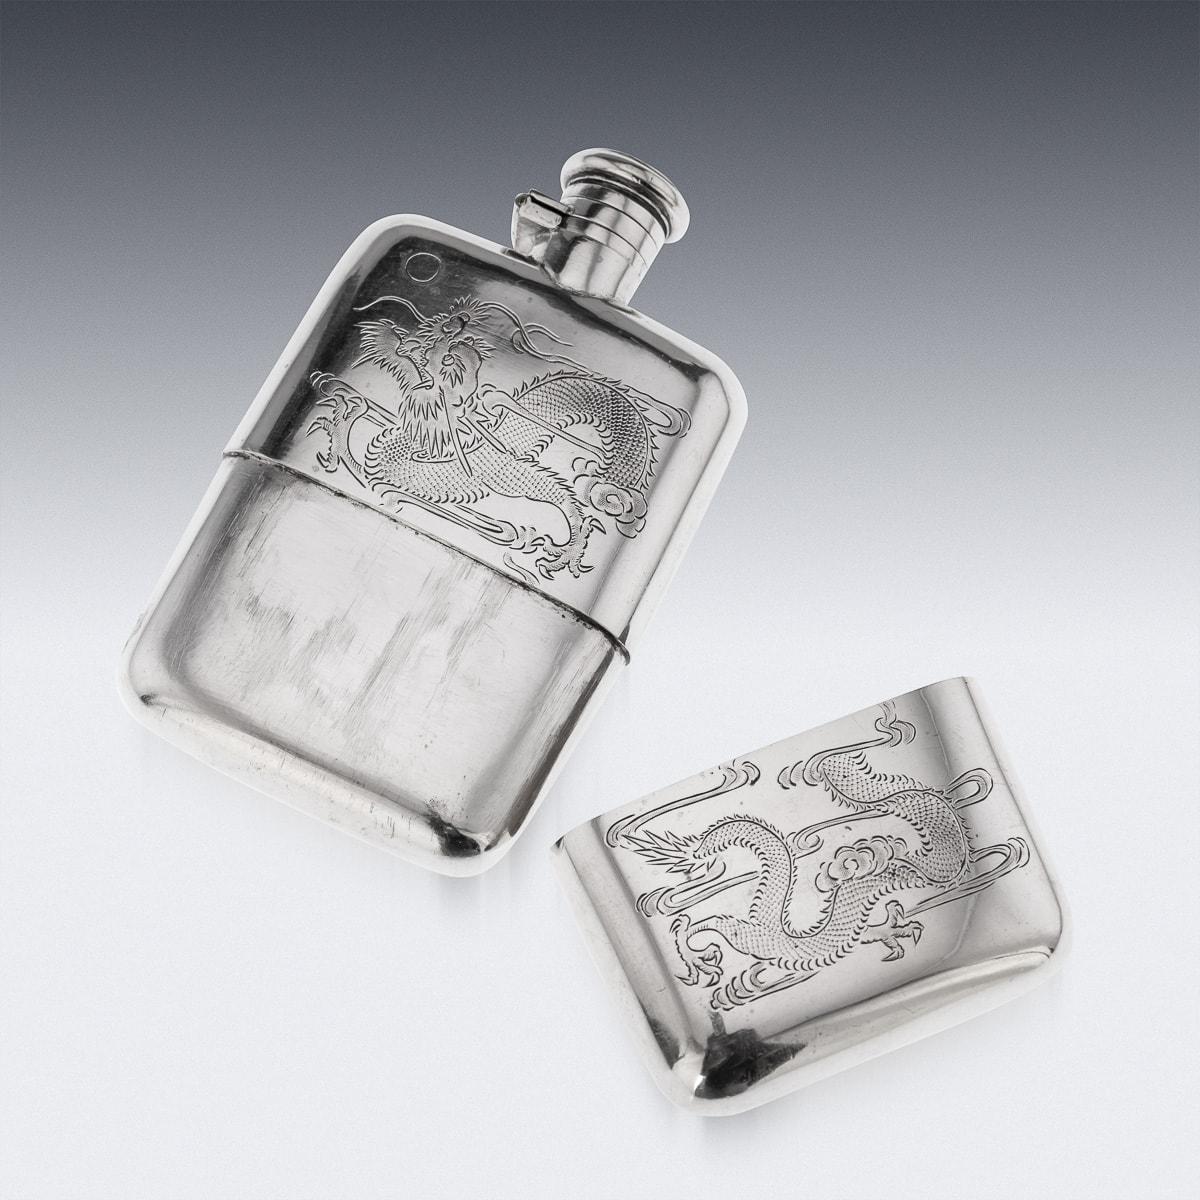 A stunning early 20th Century Chinese Export solid silver hip flask with silver hinged top and removable cup. This flask has an outer design featuring a Chinese dragon. Dragons in Chinese culture symbolise great power, good luck and strength. They